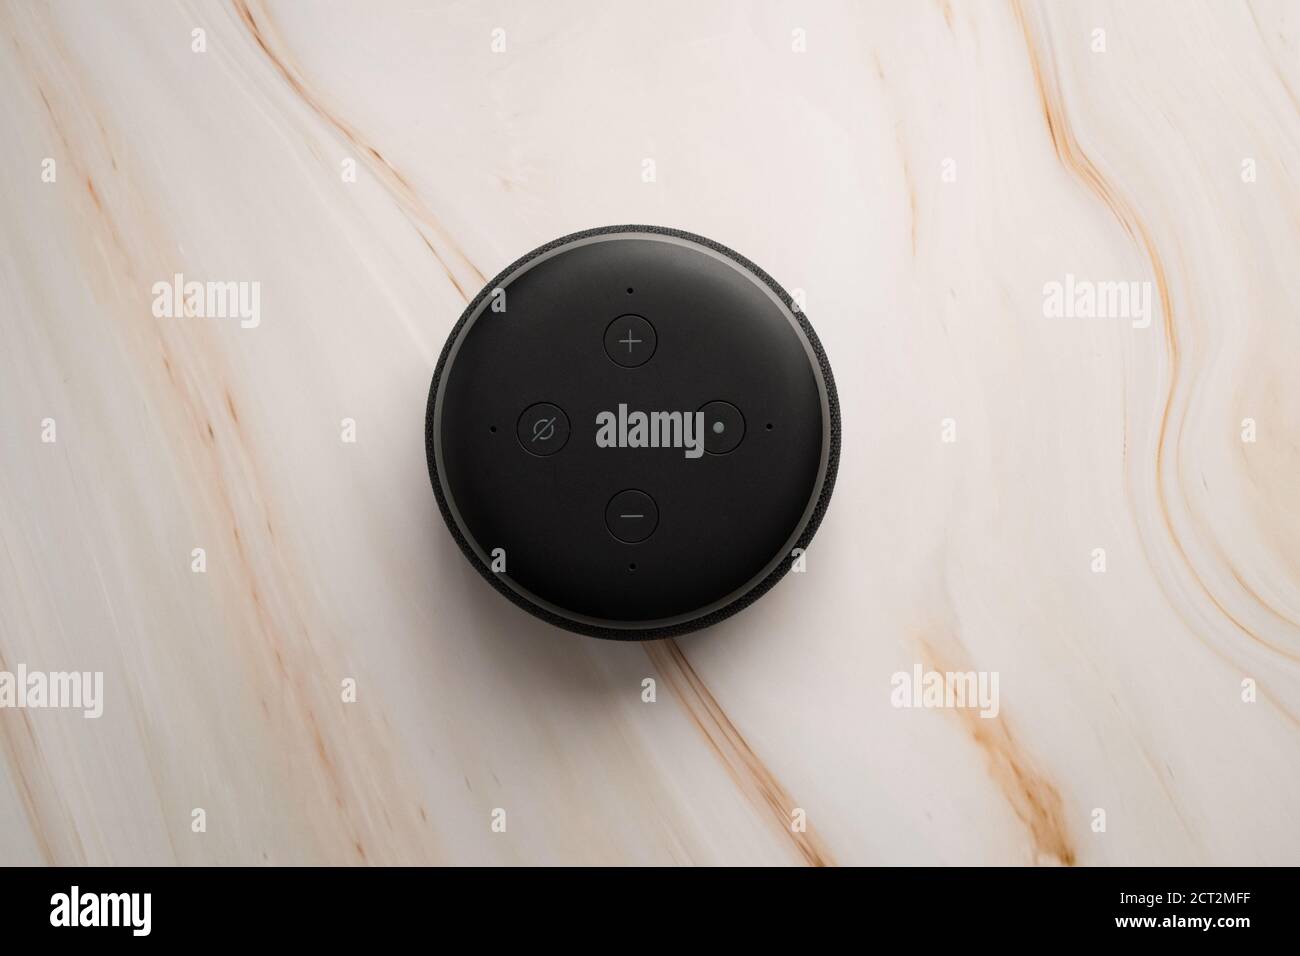 LONDON, UNITED KINGDOM - SEPTEMBER 20 2020: Close-up of an Amazon Echo Dot, the virtual assistant speaker, with a modern marble background. Stock Photo